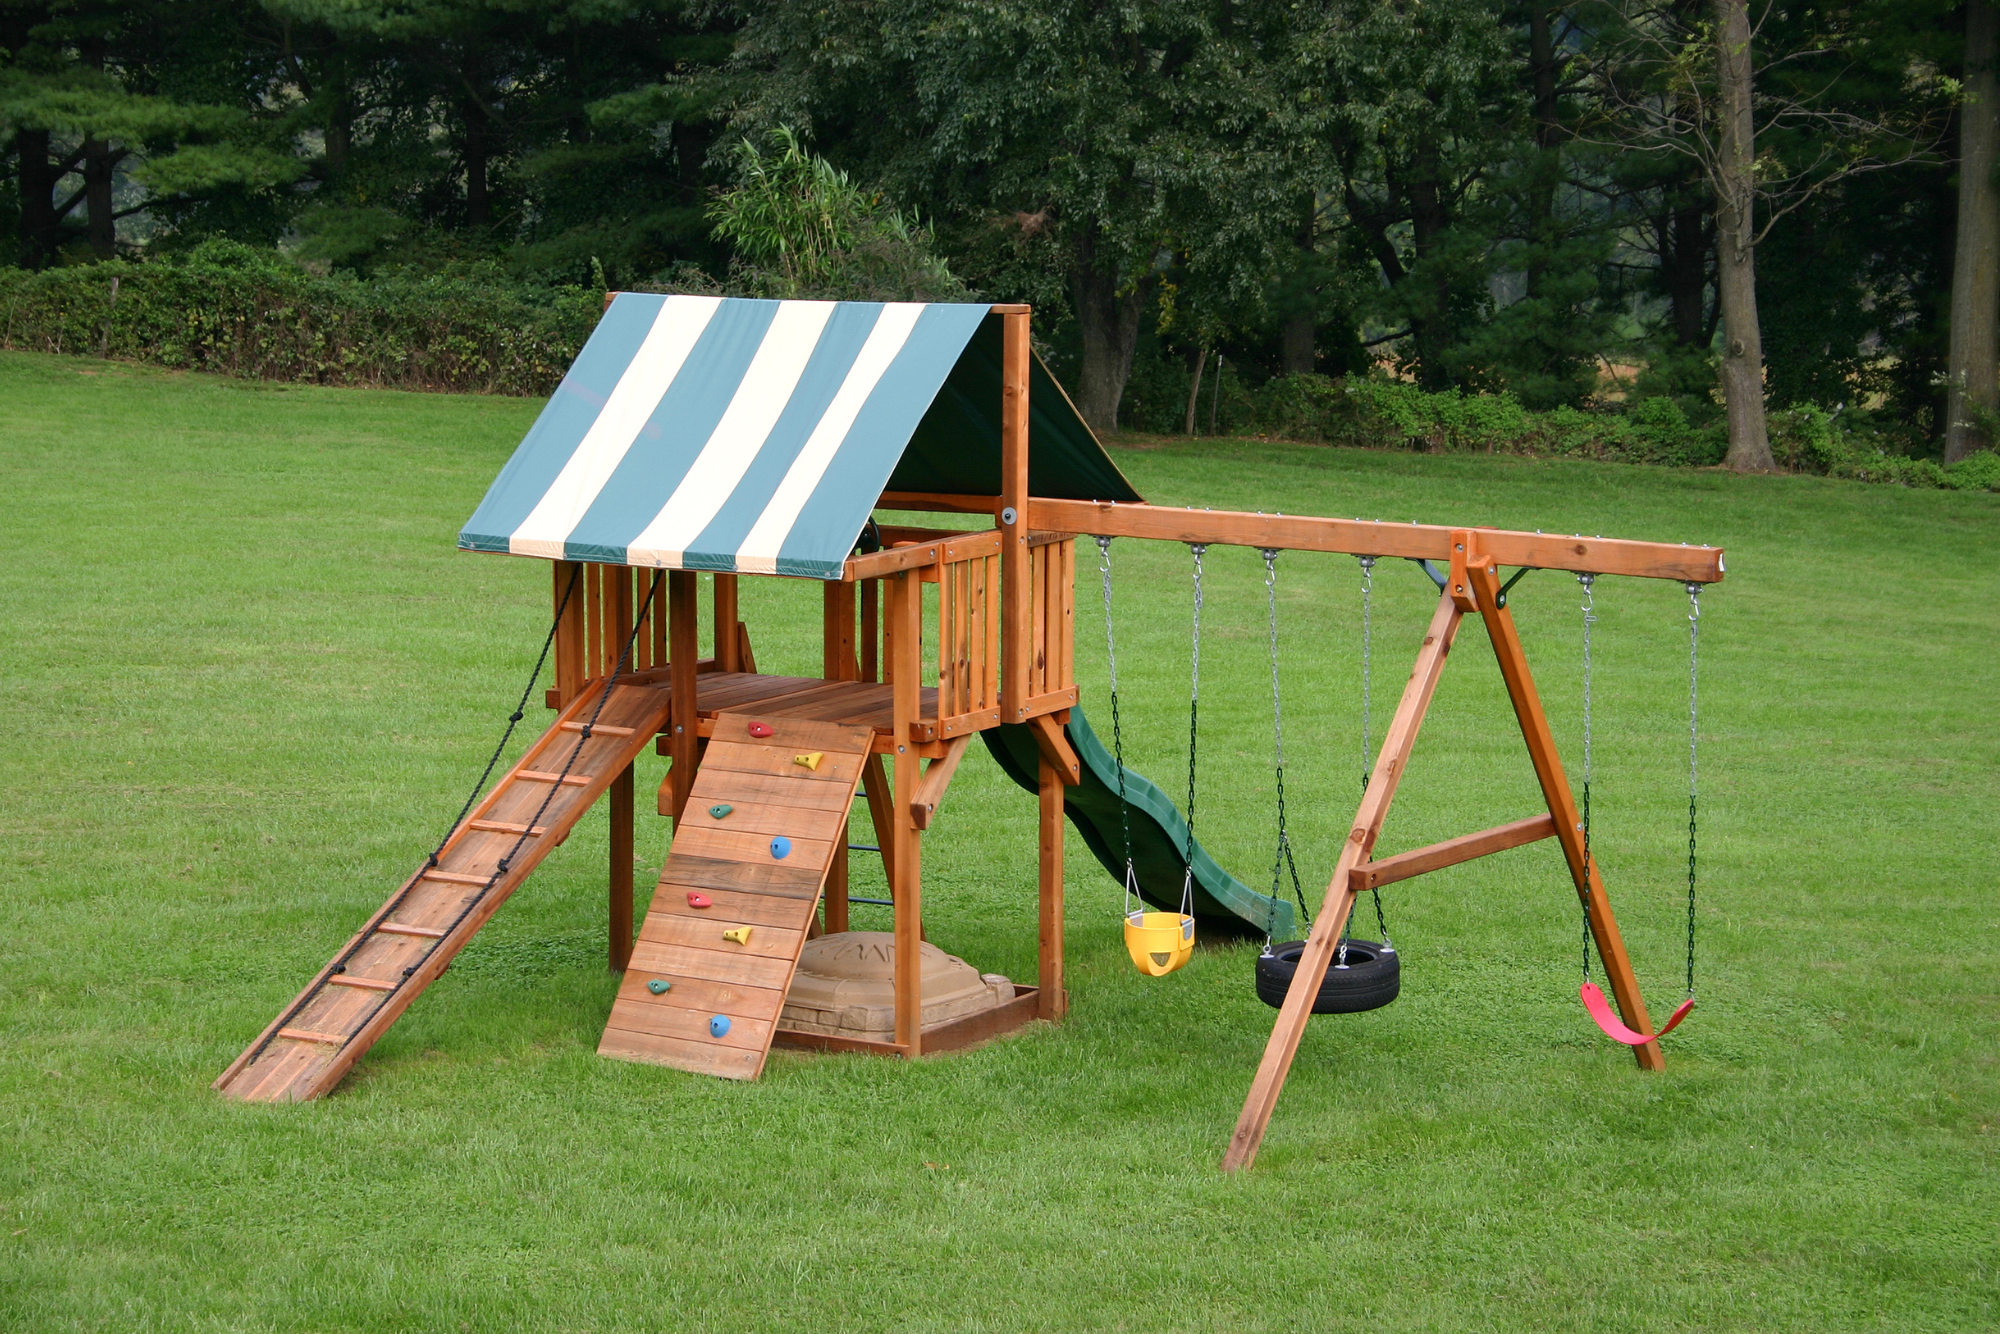 Climbing frame and swing set